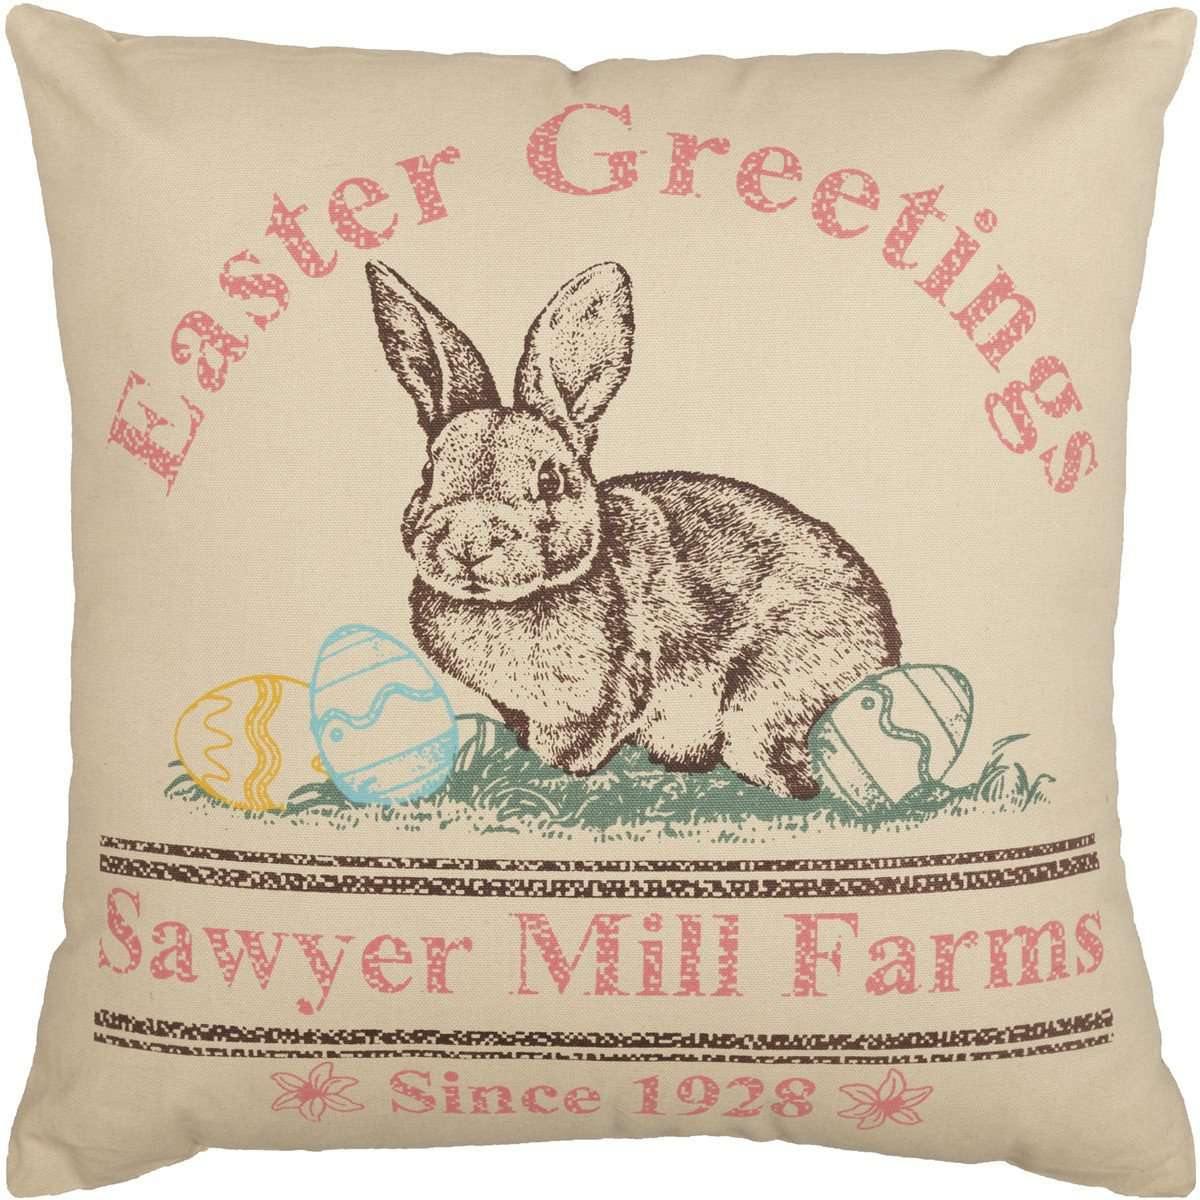 Sawyer Mill Easter Greetings Bunny Pillow 18x18 VHC Brands - The Fox Decor